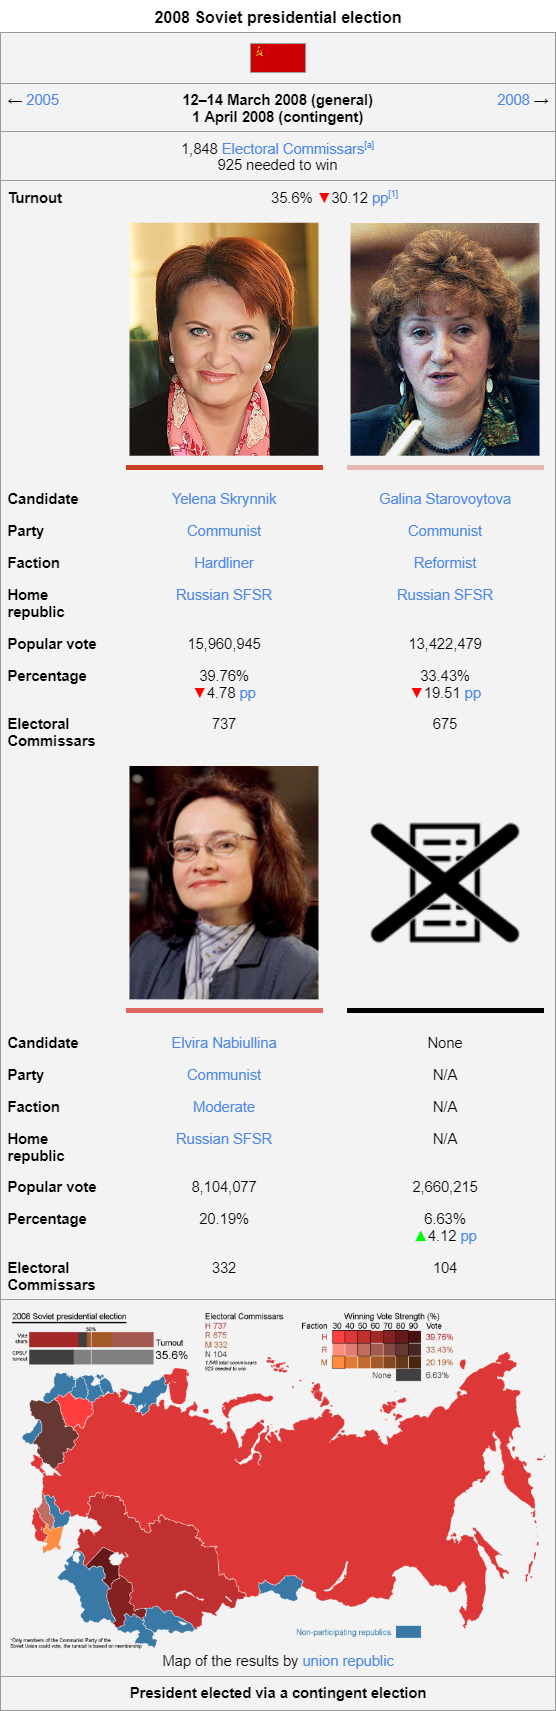 2008 Soviet presidential election wiki.png